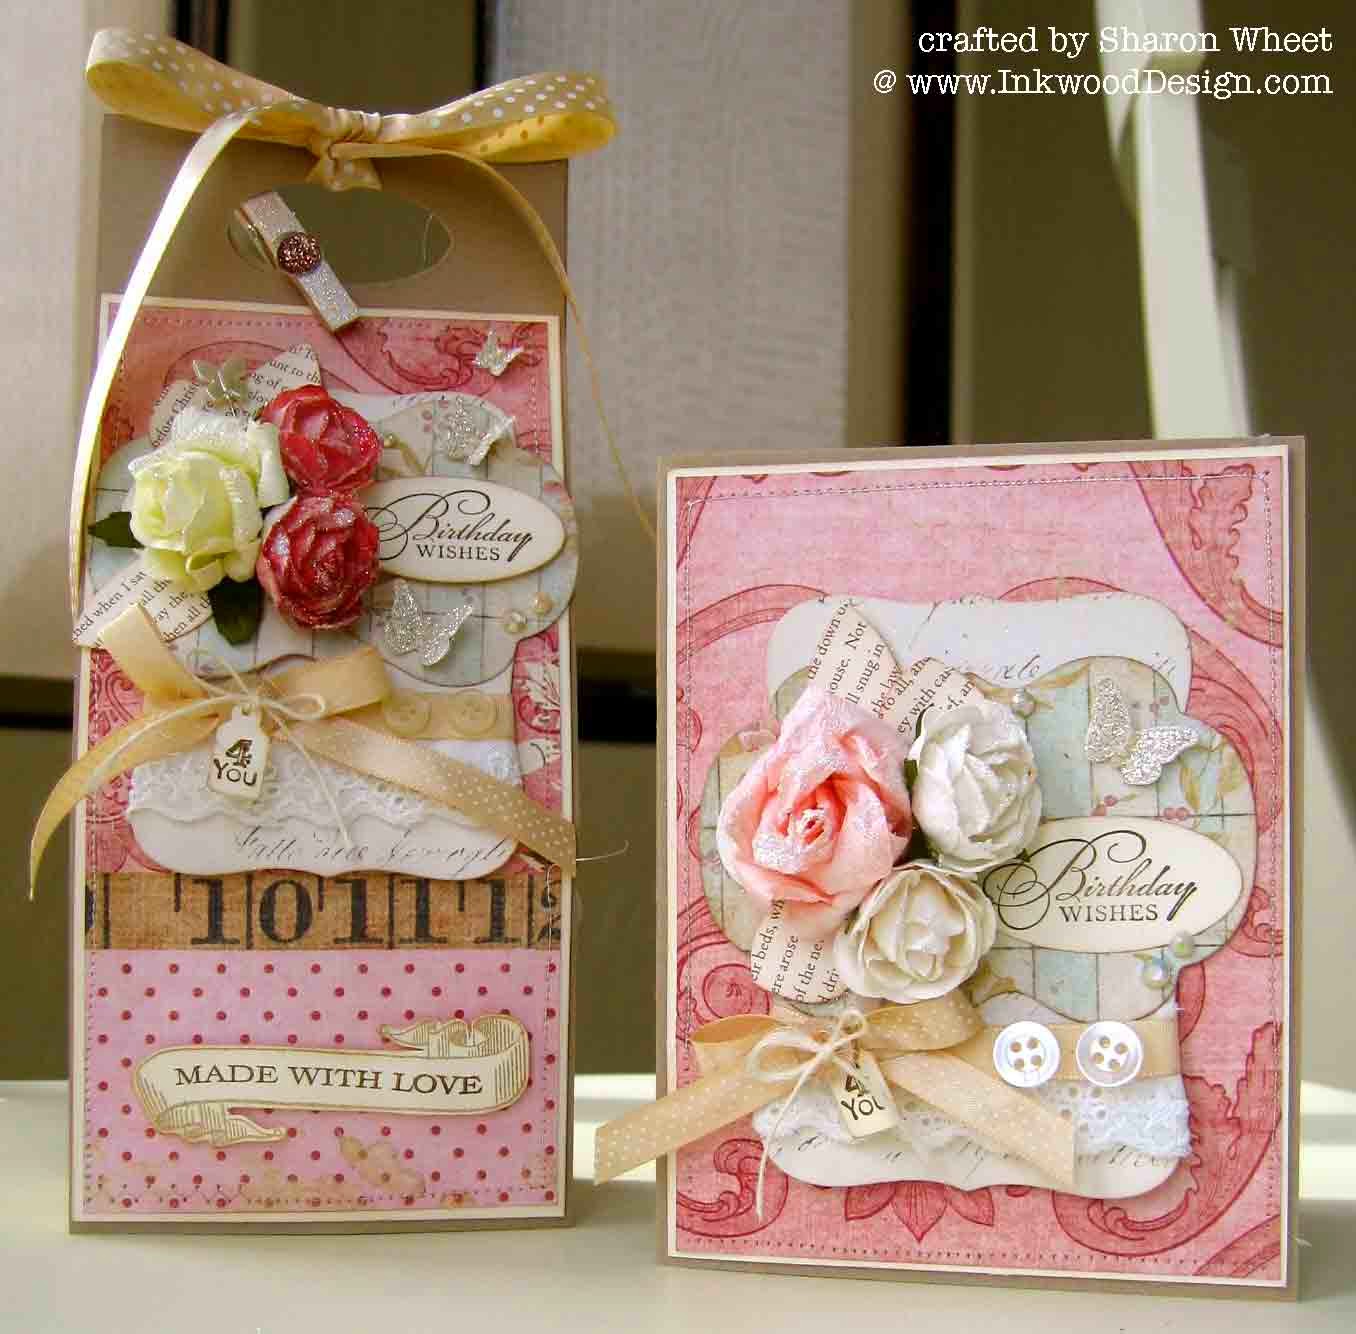 Designs by Sharon: Text, Flowers, and Buttons